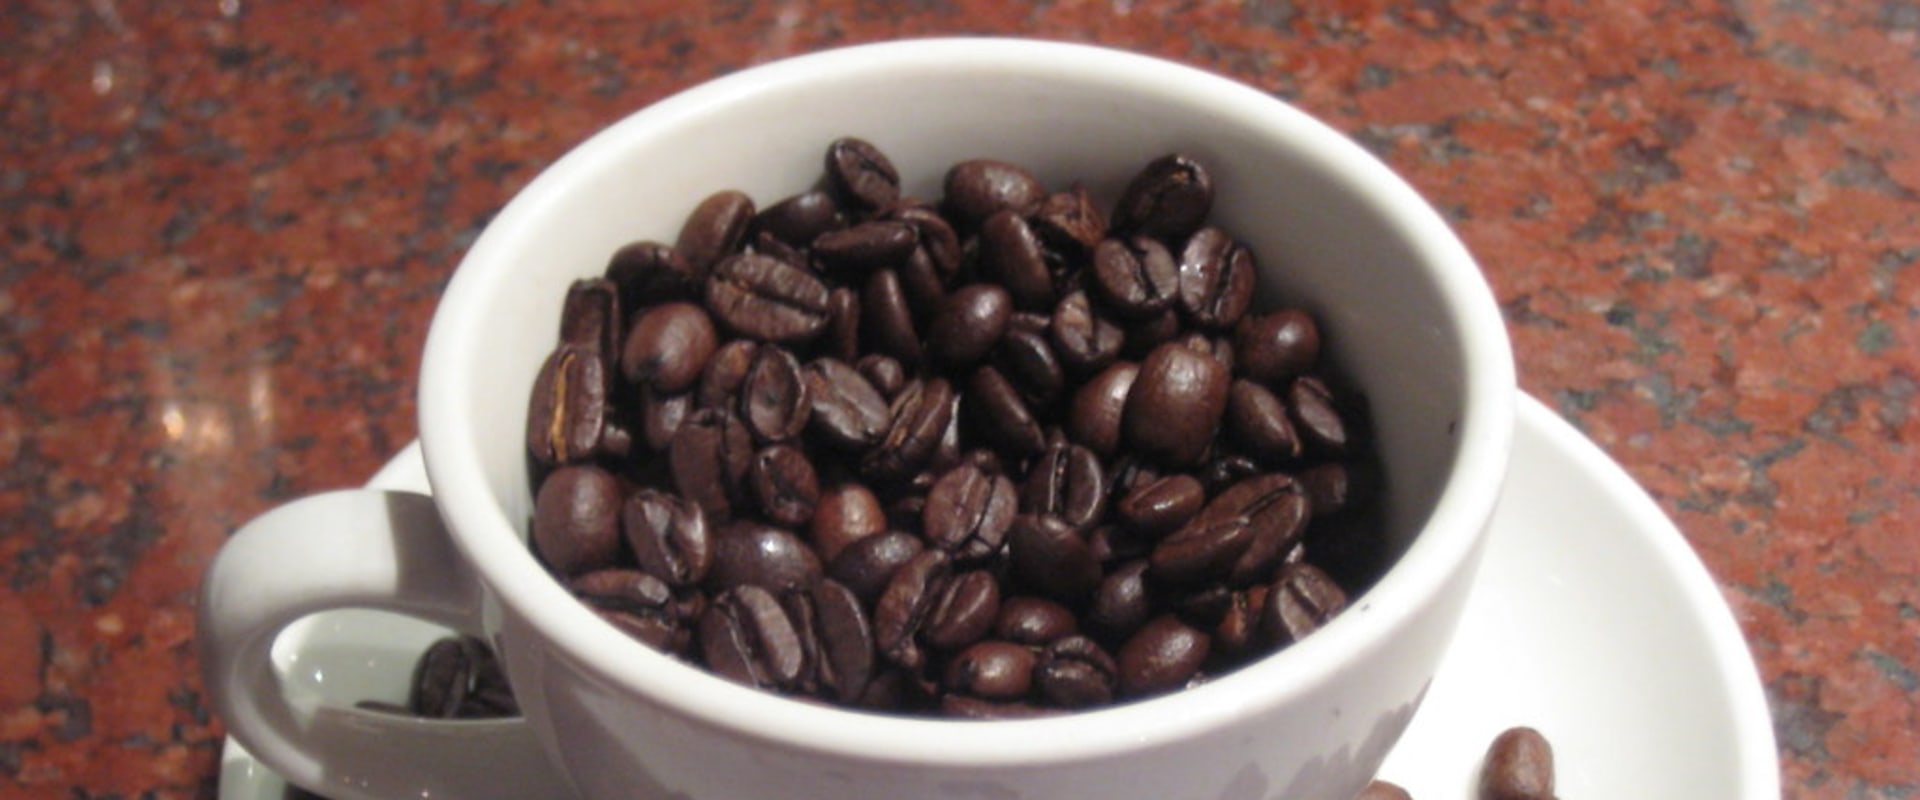 Where are dunkin donuts coffee beans from?